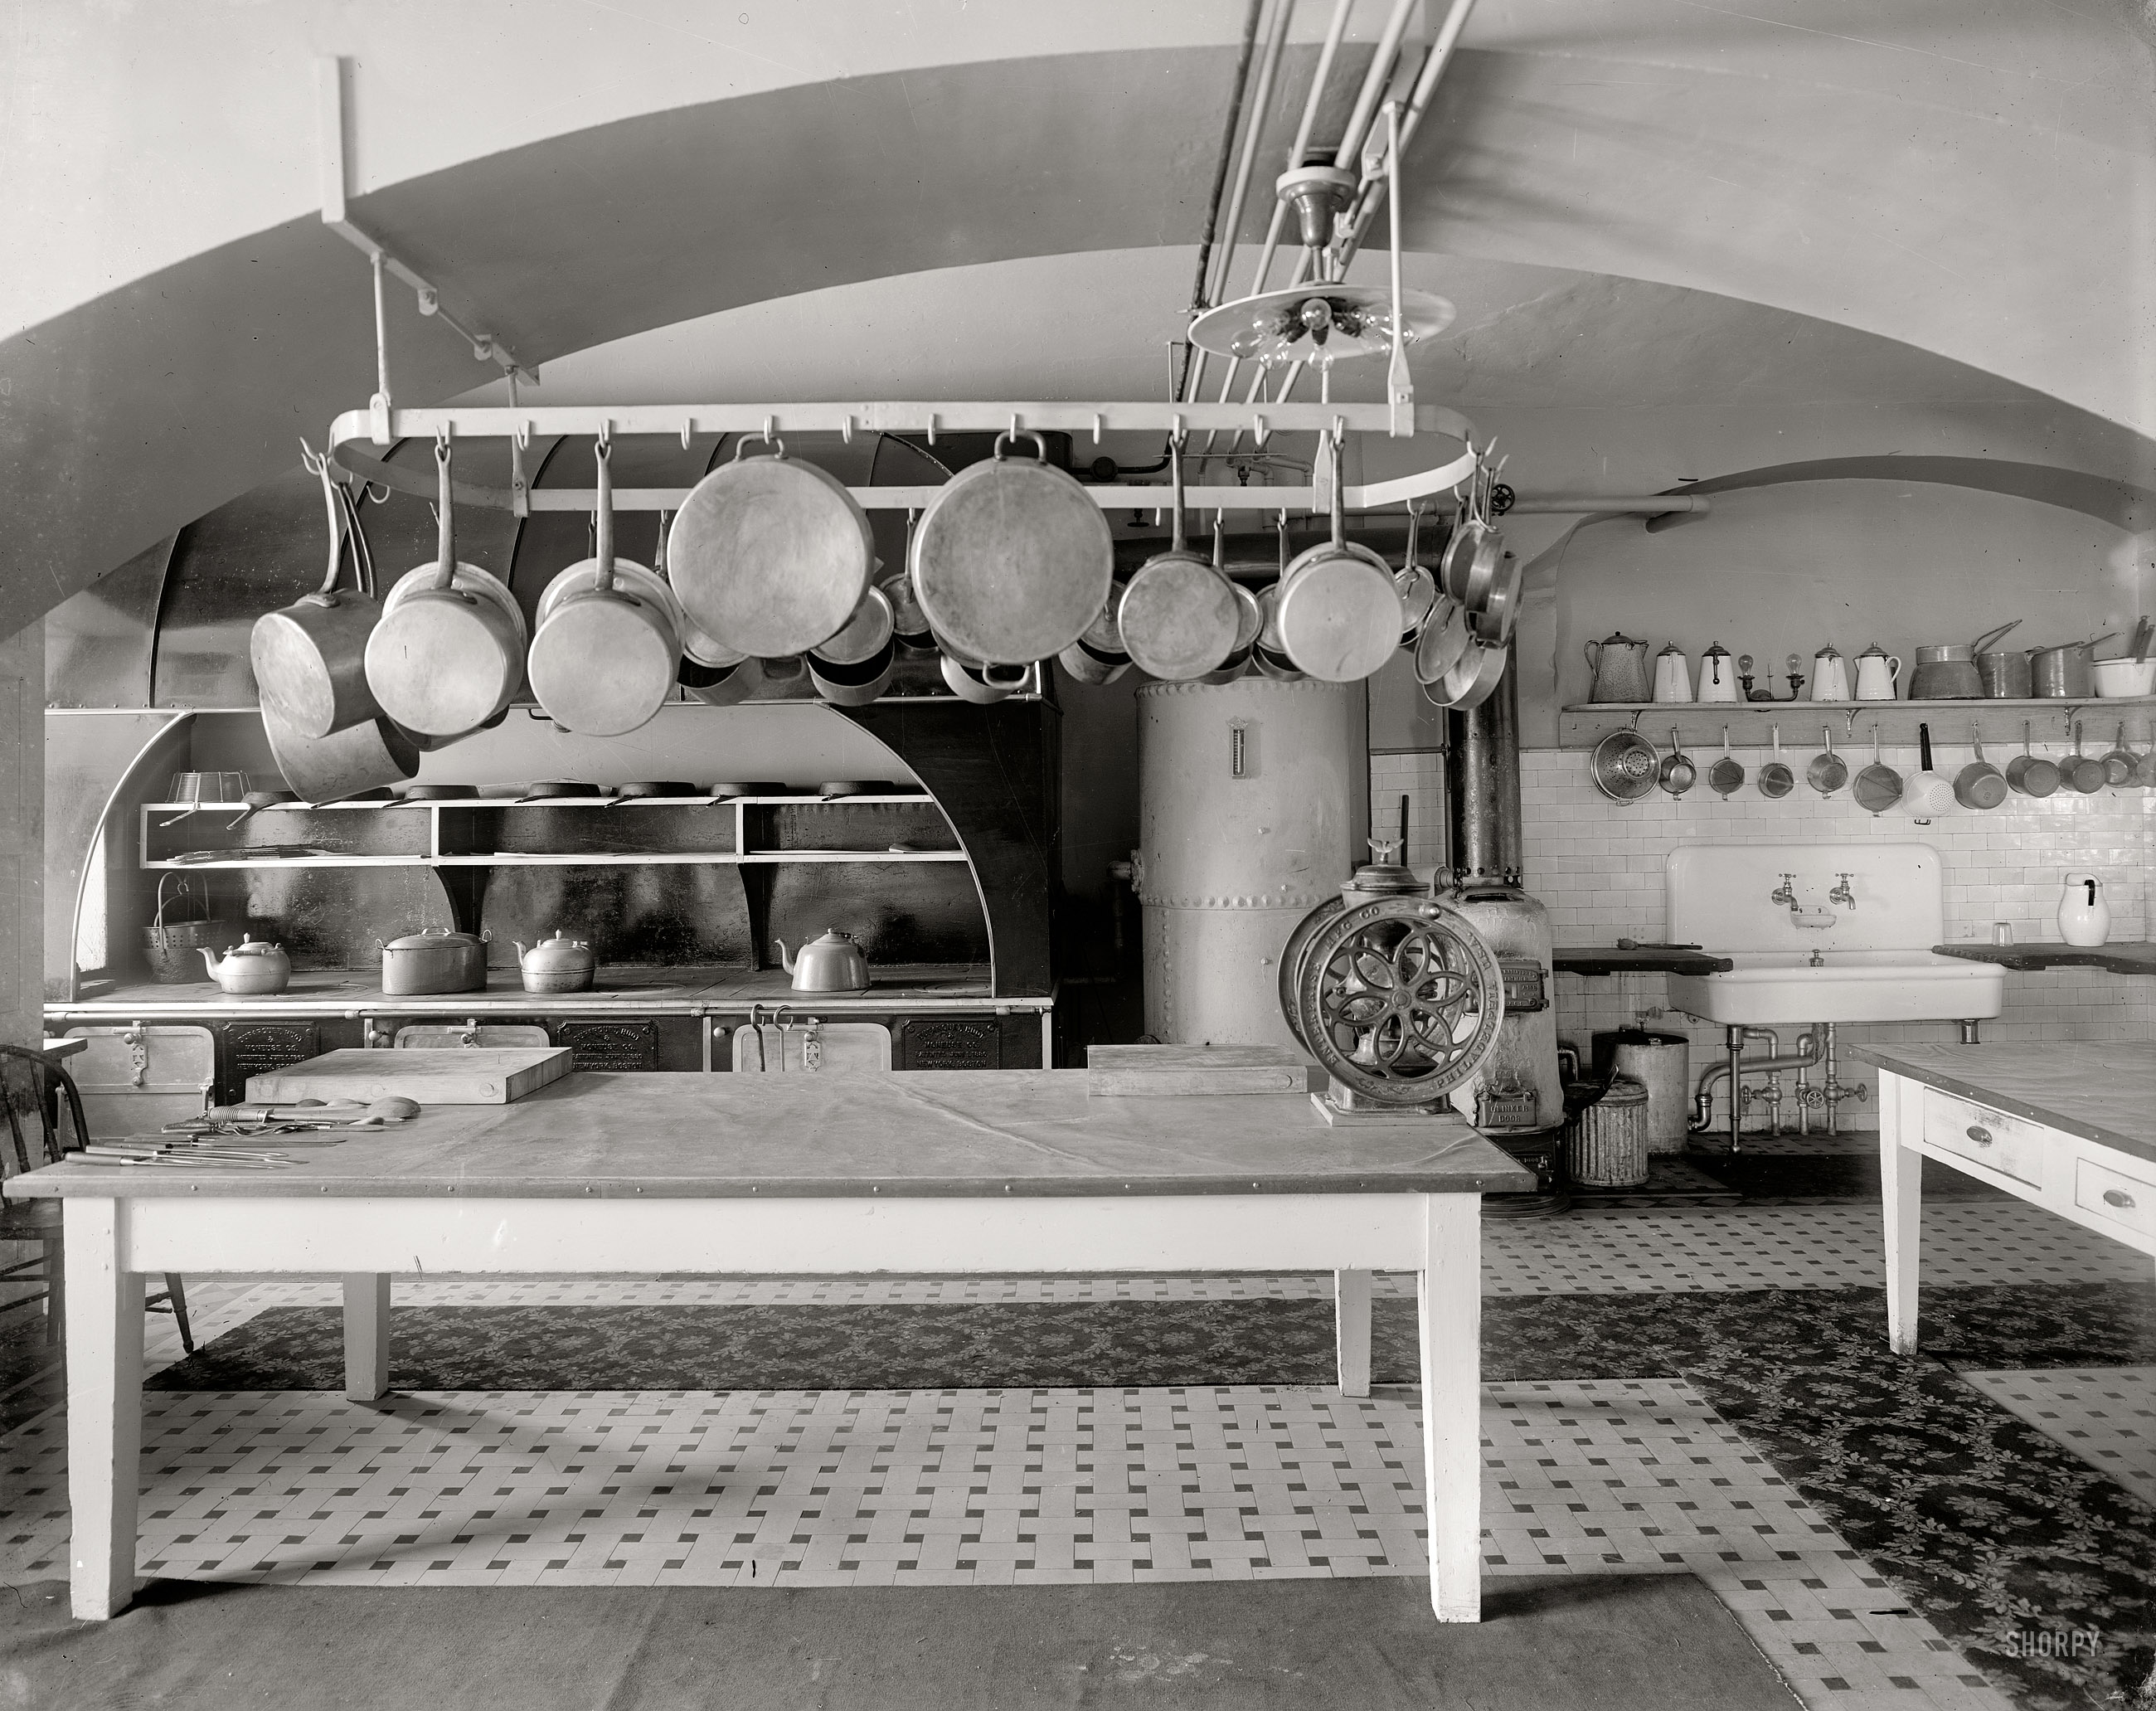 The White House kitchen circa 1909. Note the high-tech light fixture. Harris & Ewing Collection glass negative, Library of Congress. View full size.